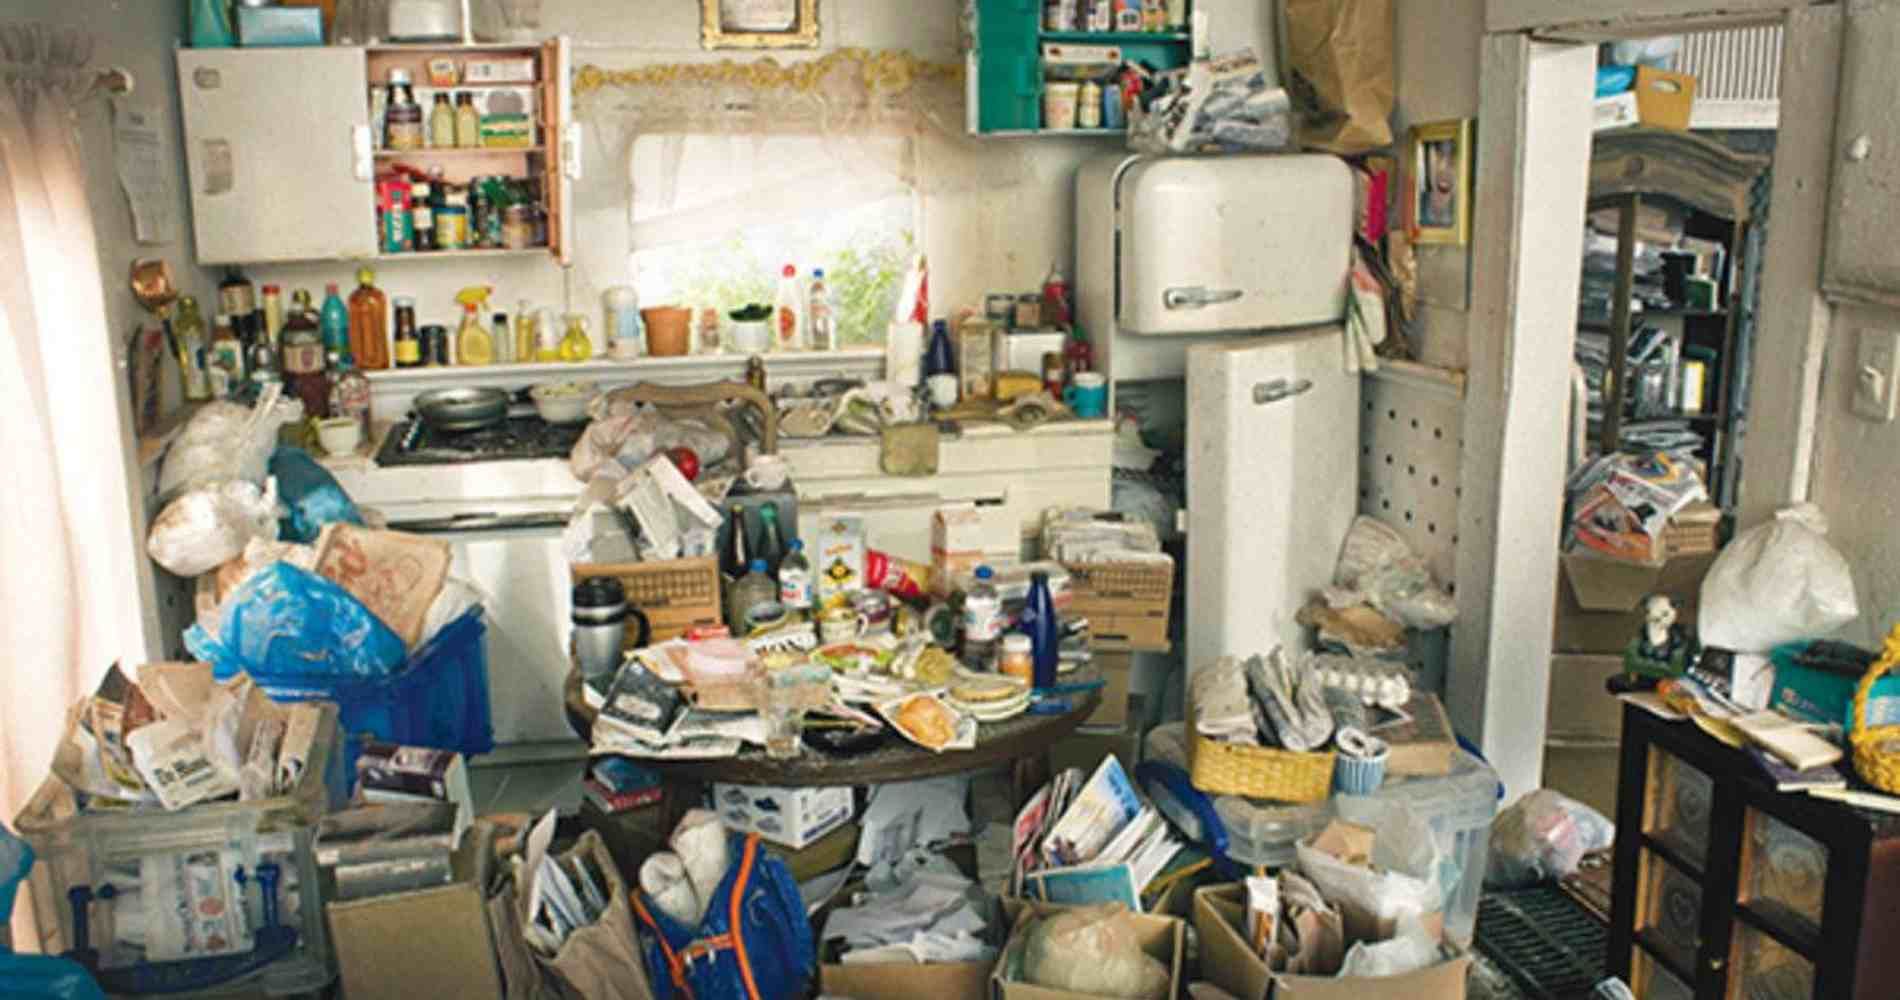 #1 for Hoarding Cleanup in Mesa, AZ with Over 1200 5-Star Reviews!